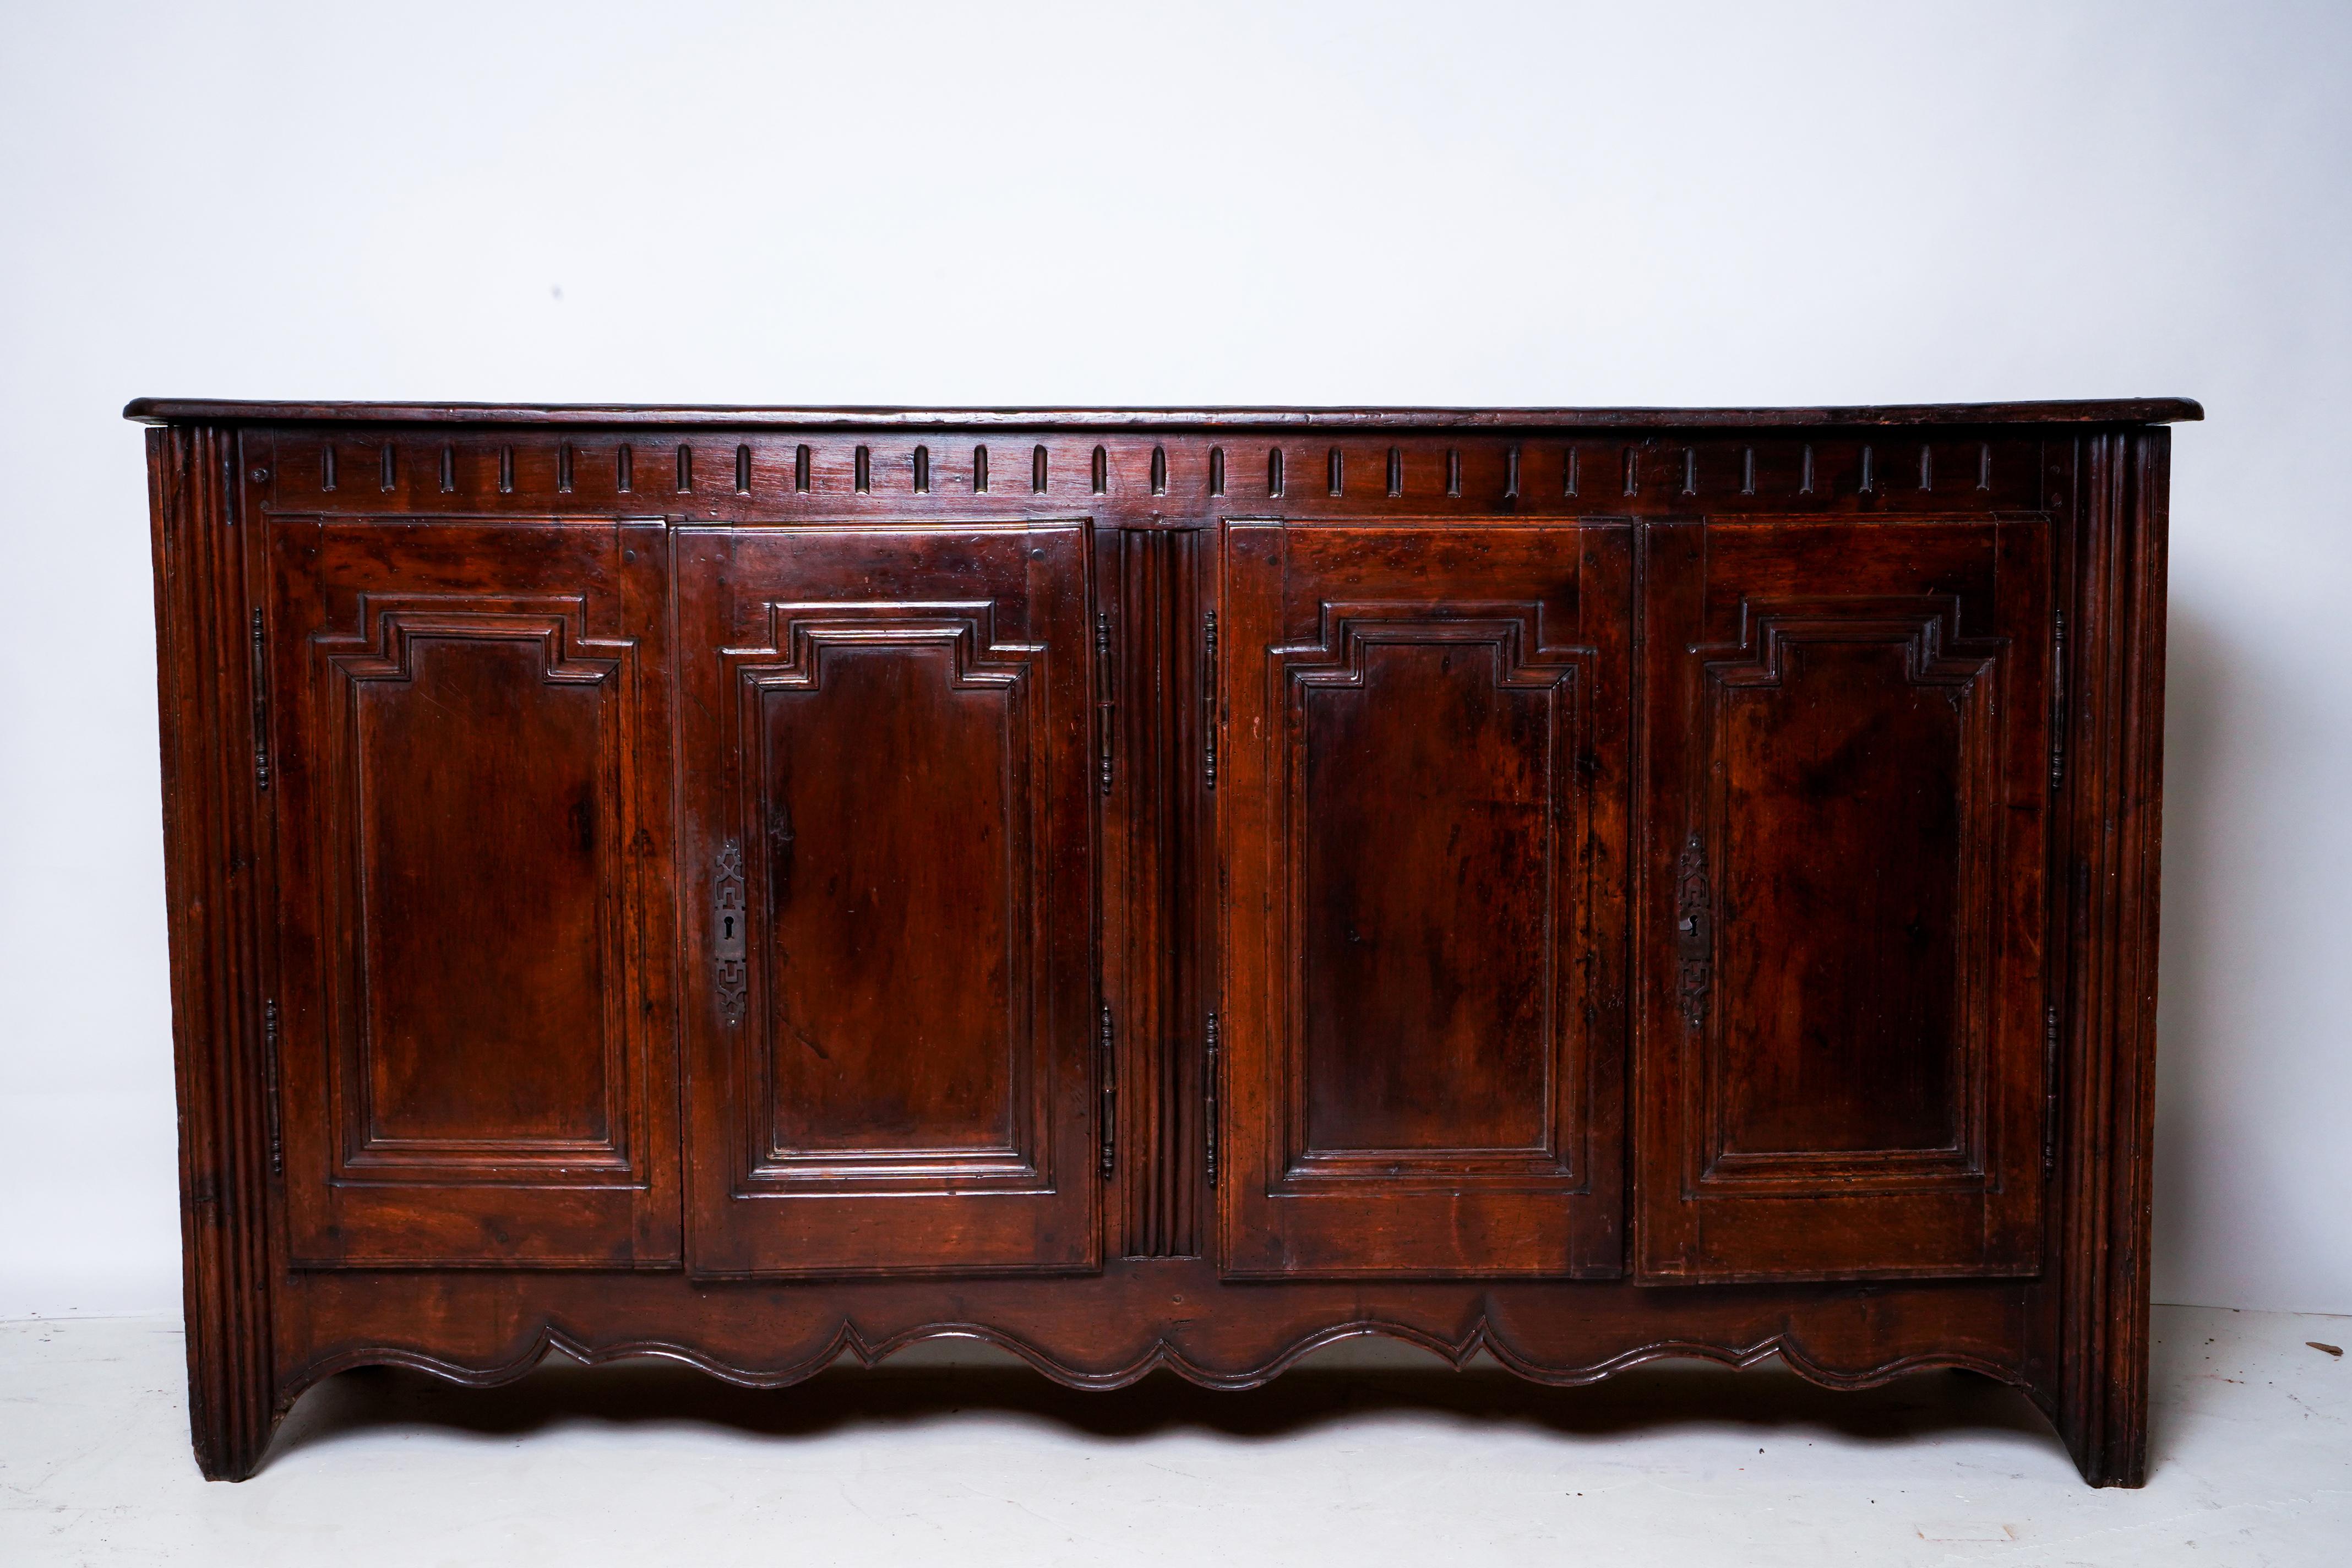 This boldly understated sideboard is made from Walnut Wood and features a unique combination of rectilinear and curvilinear  decoration. It is from the Dordogne region of France and has been preserved in its unrestored state.